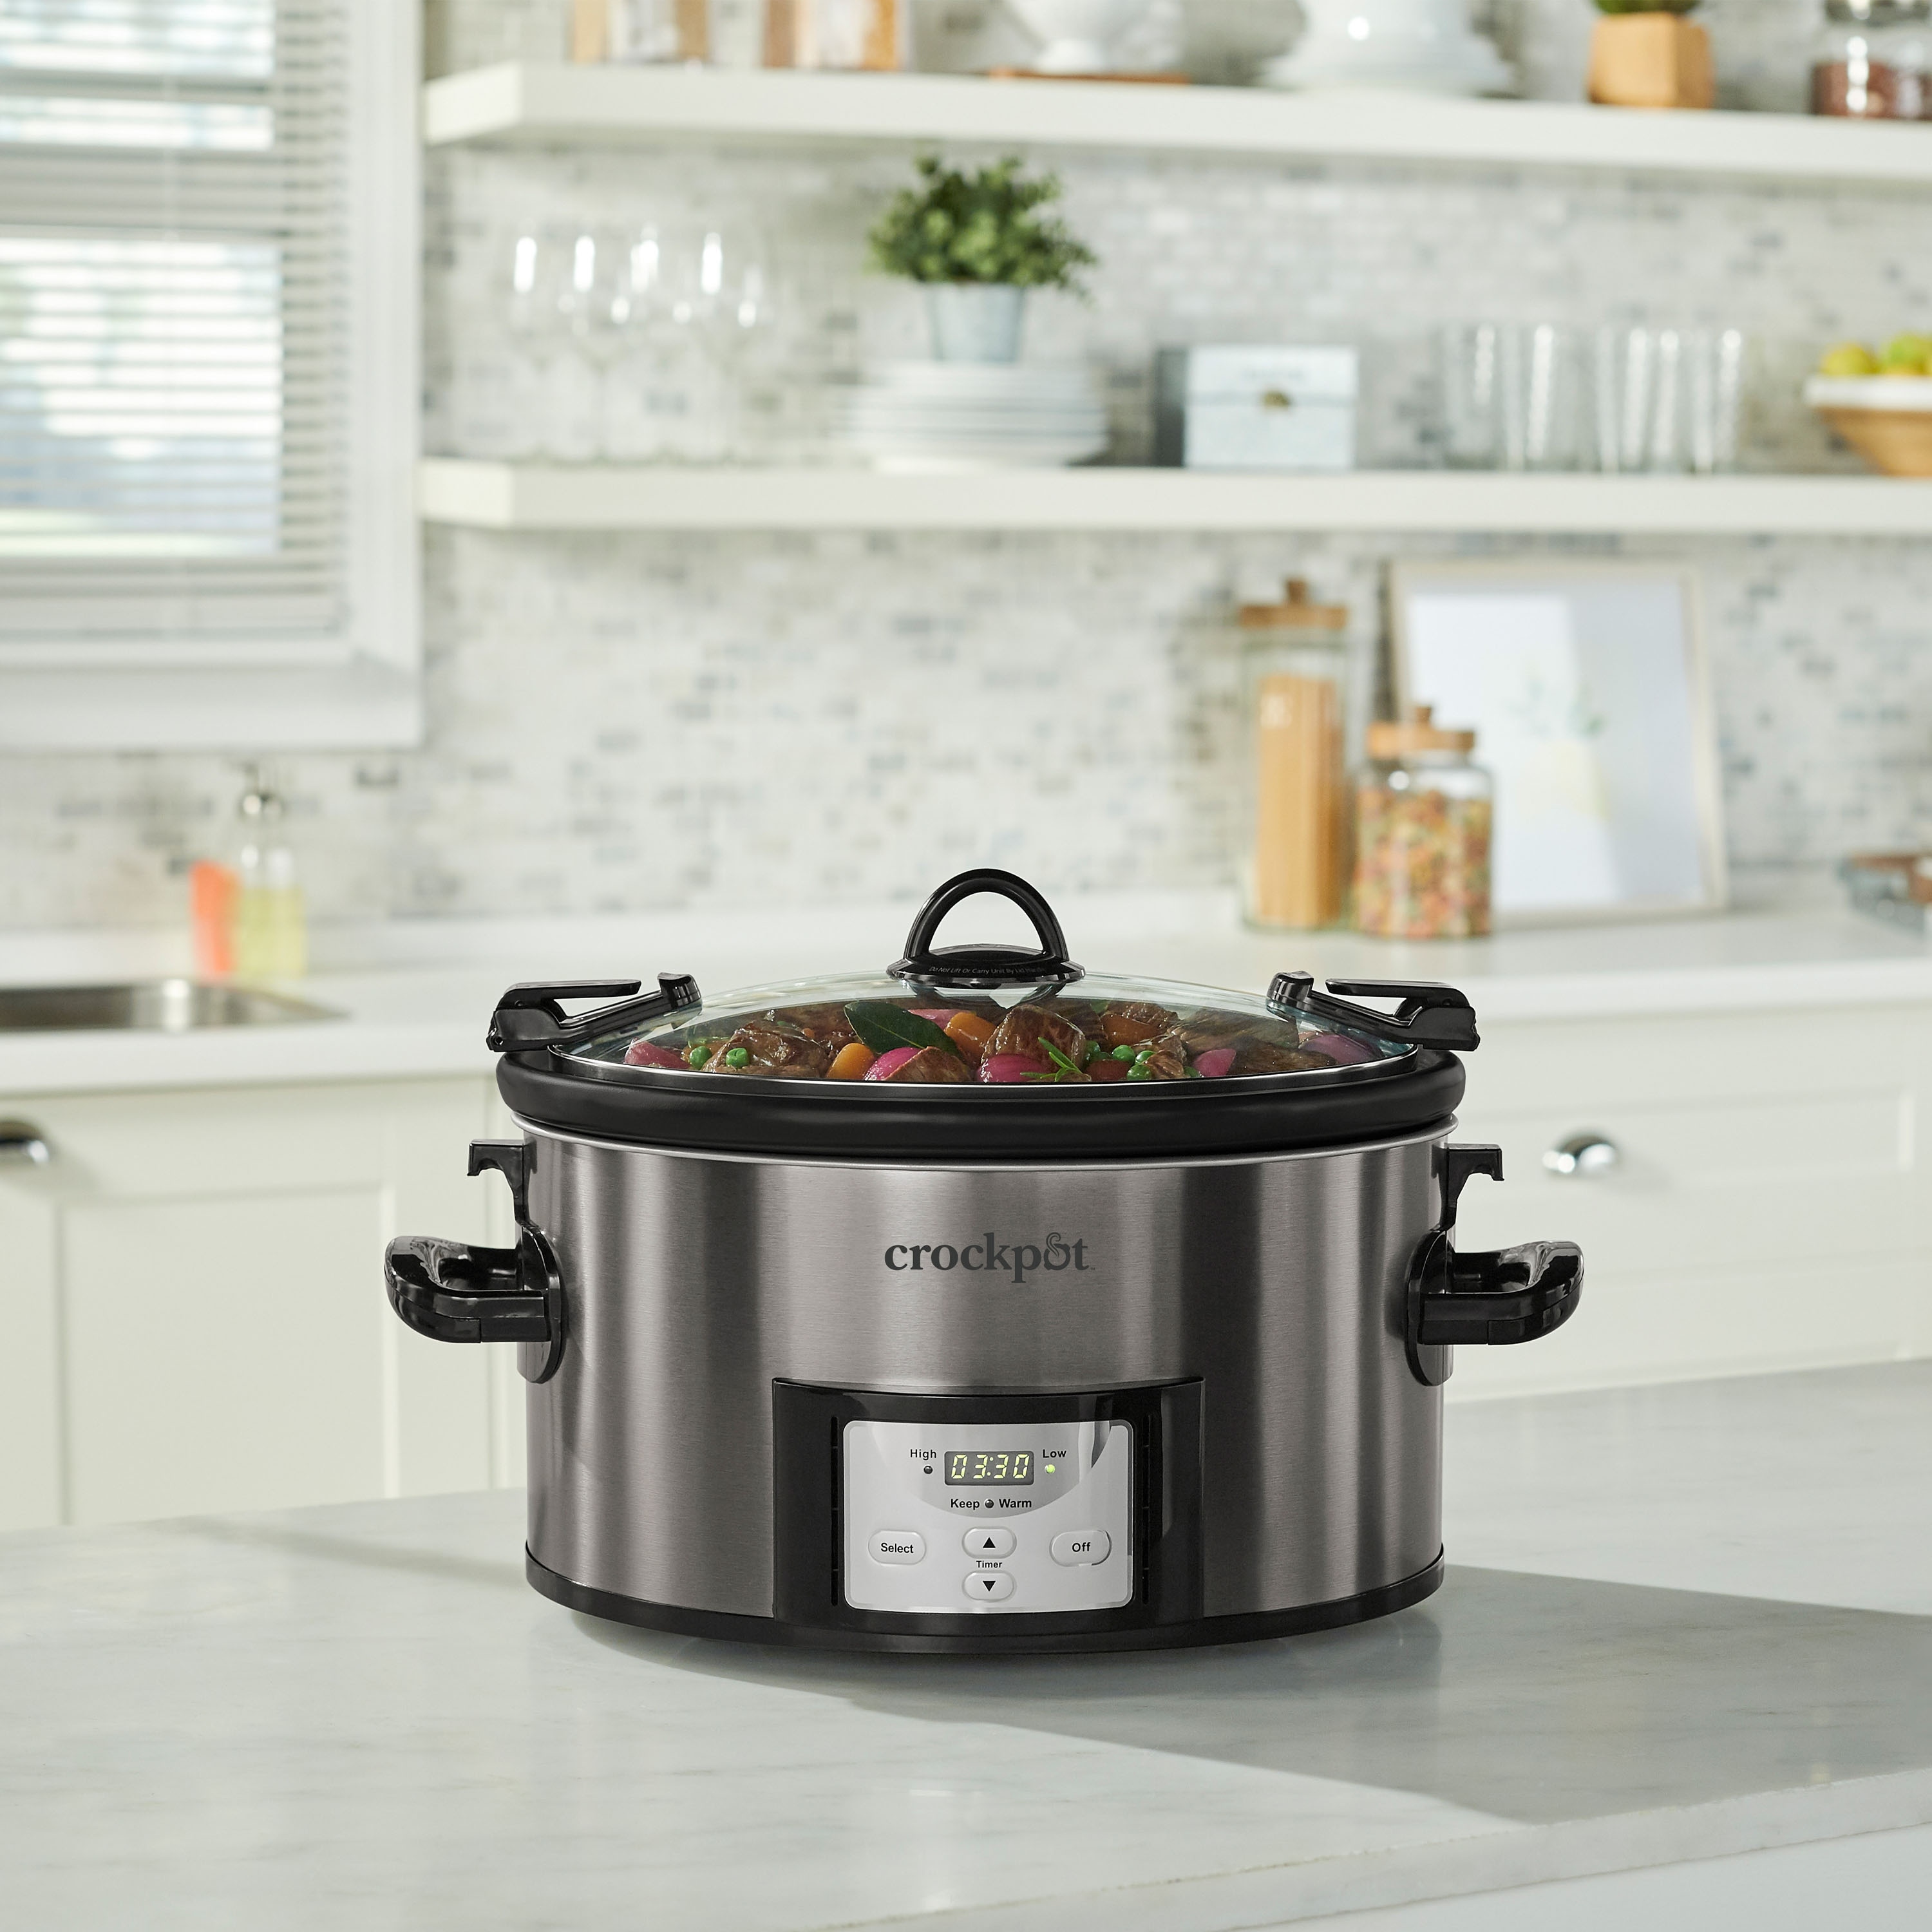 Crockpot 7-Quart Easy-to-Clean Cook & Carry Slow Cooker, Black